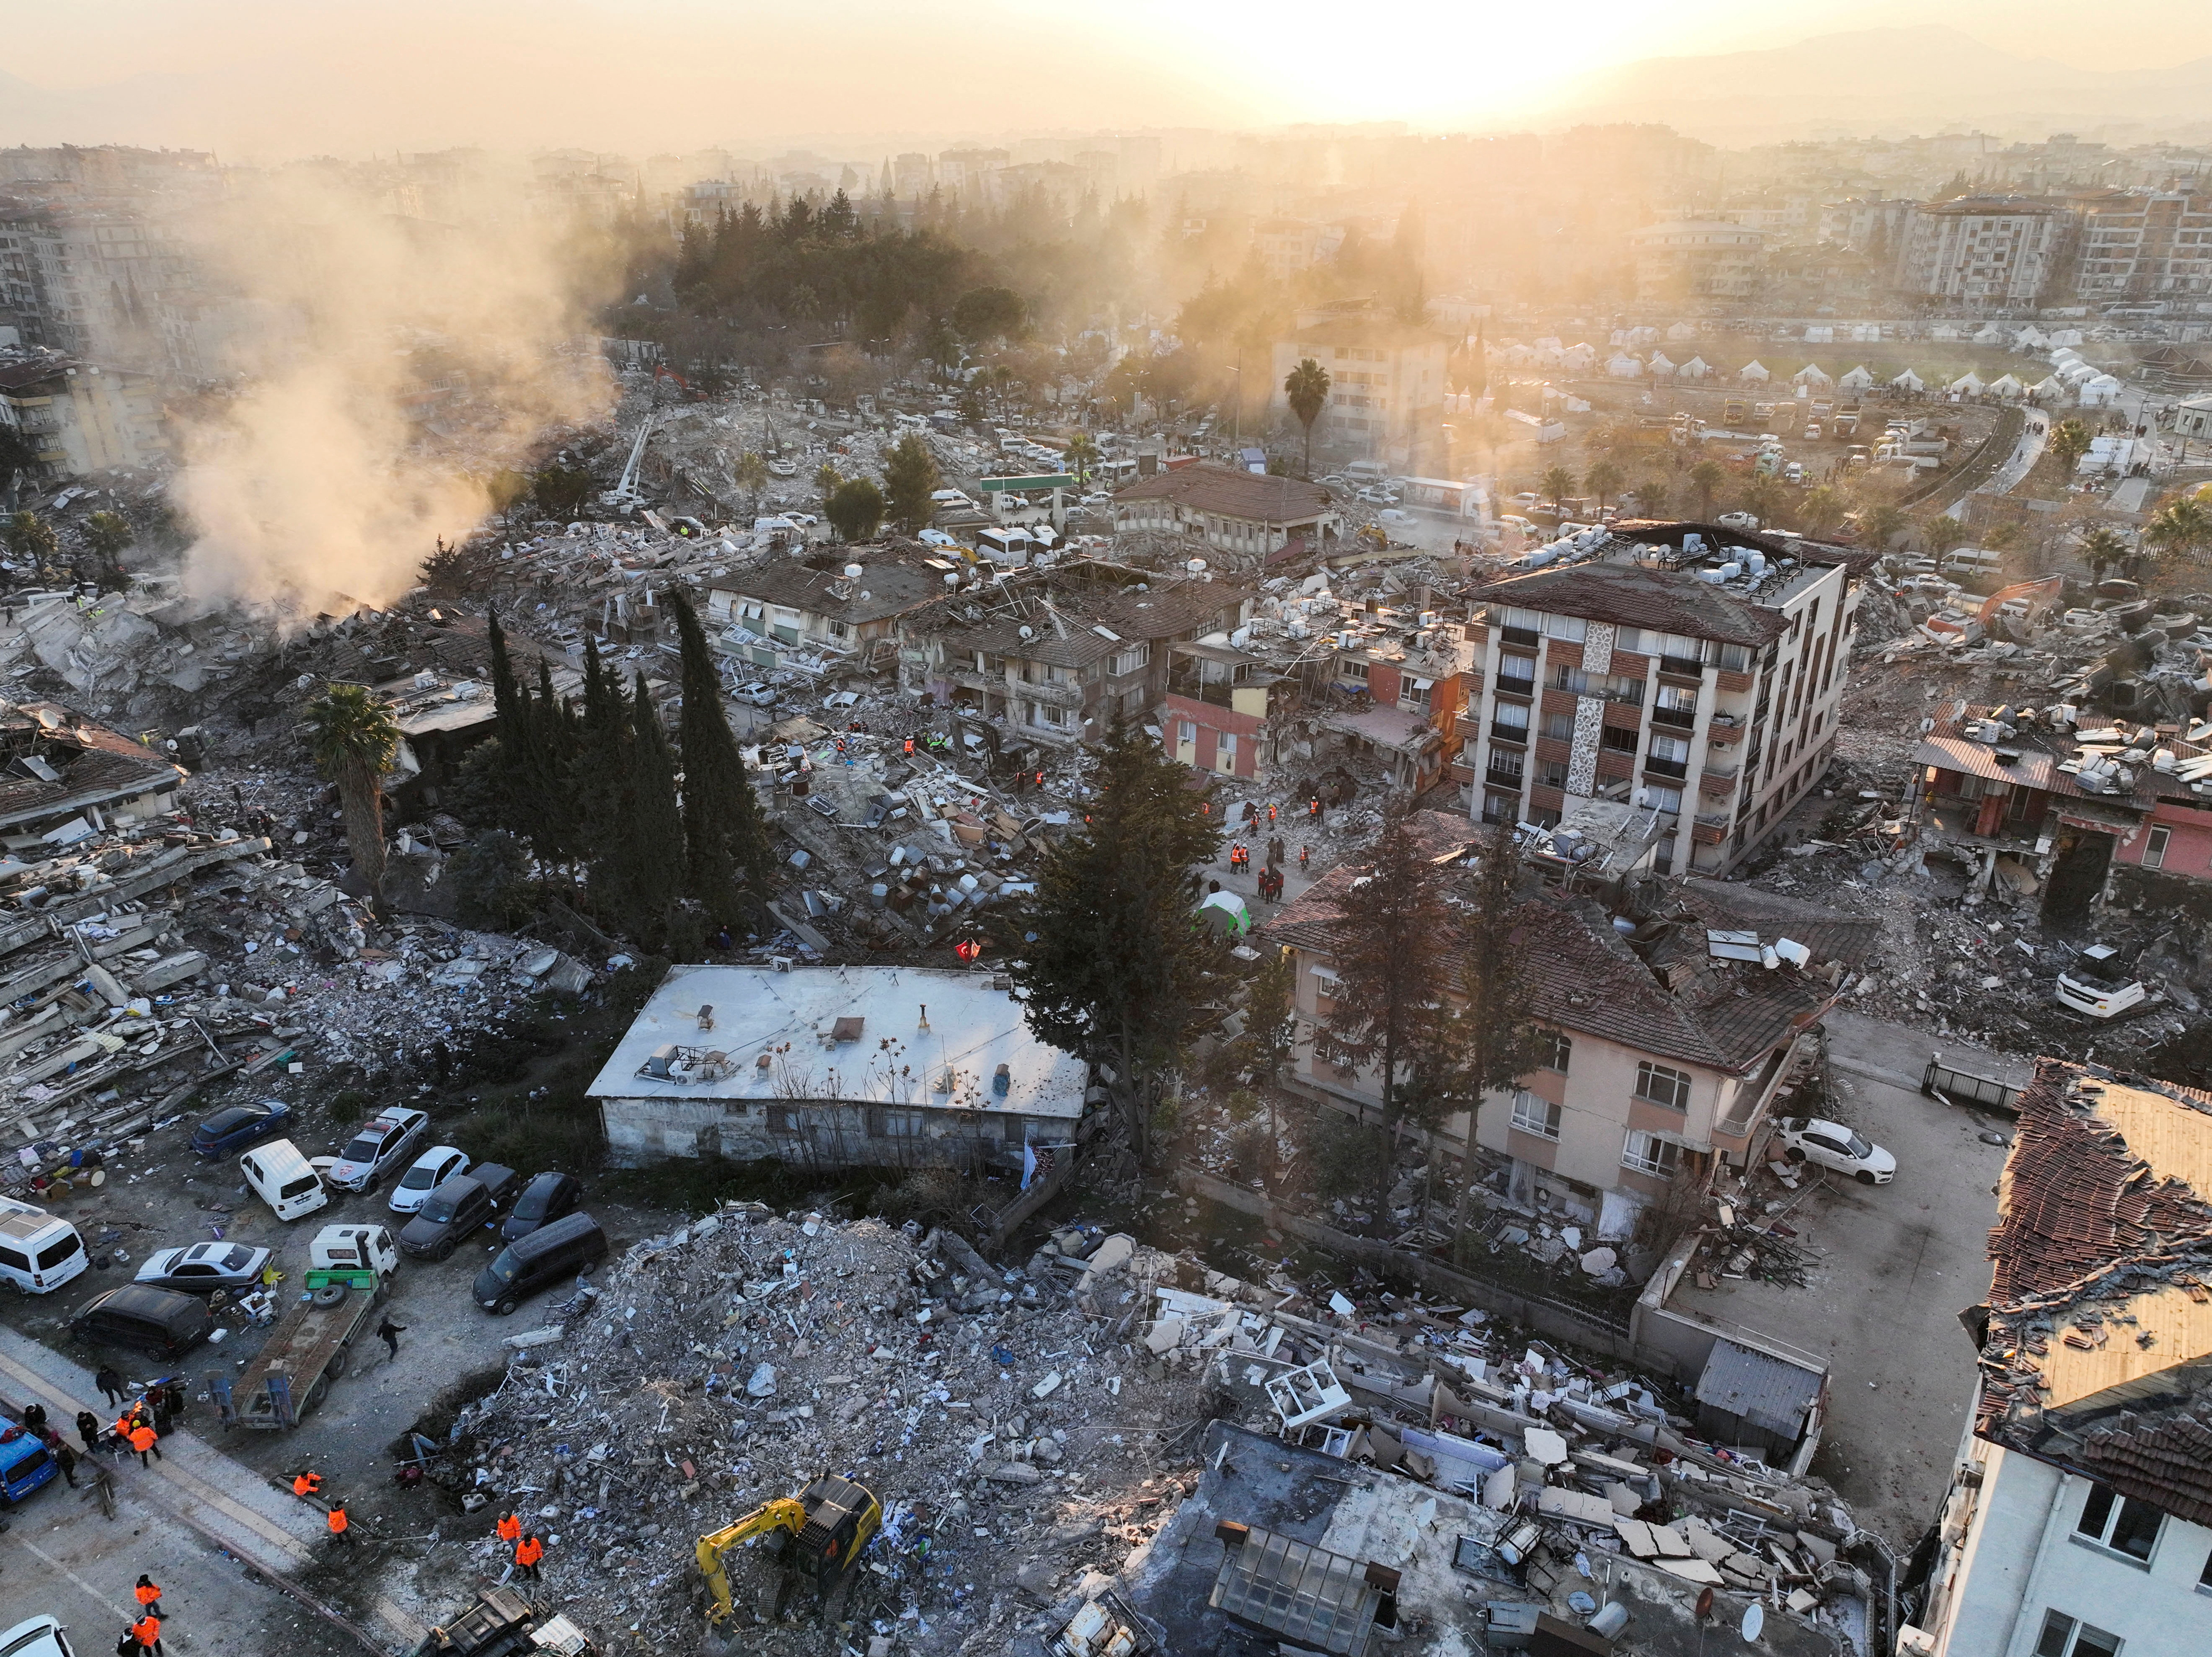 Aftermath of the deadly earthquake in Hatay, Turkey